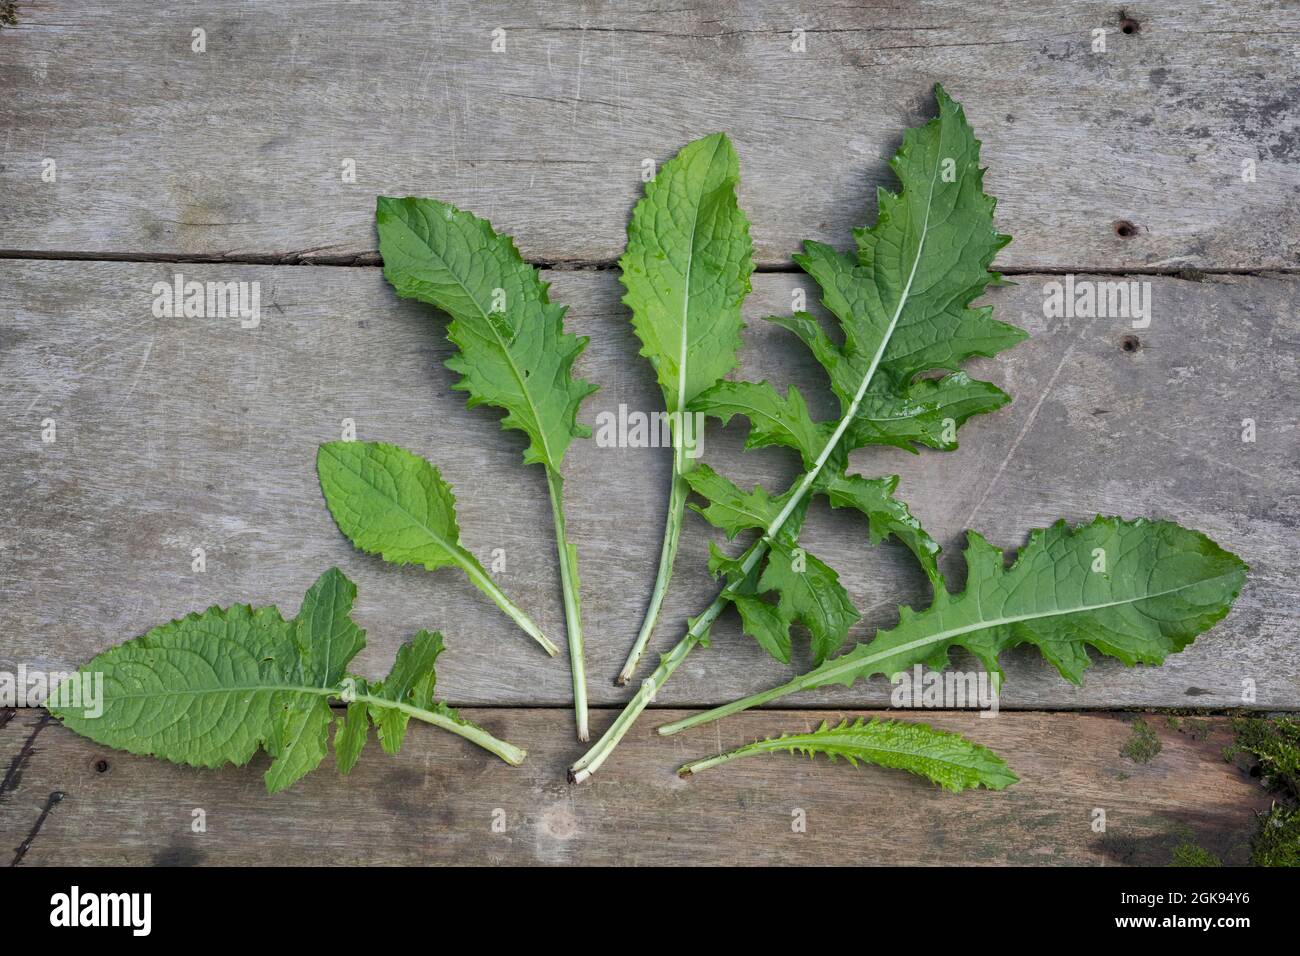 cabbage thistle (Cirsium oleraceum), differnet leaf shapes of  a cabbage thistle, Germany Stock Photo